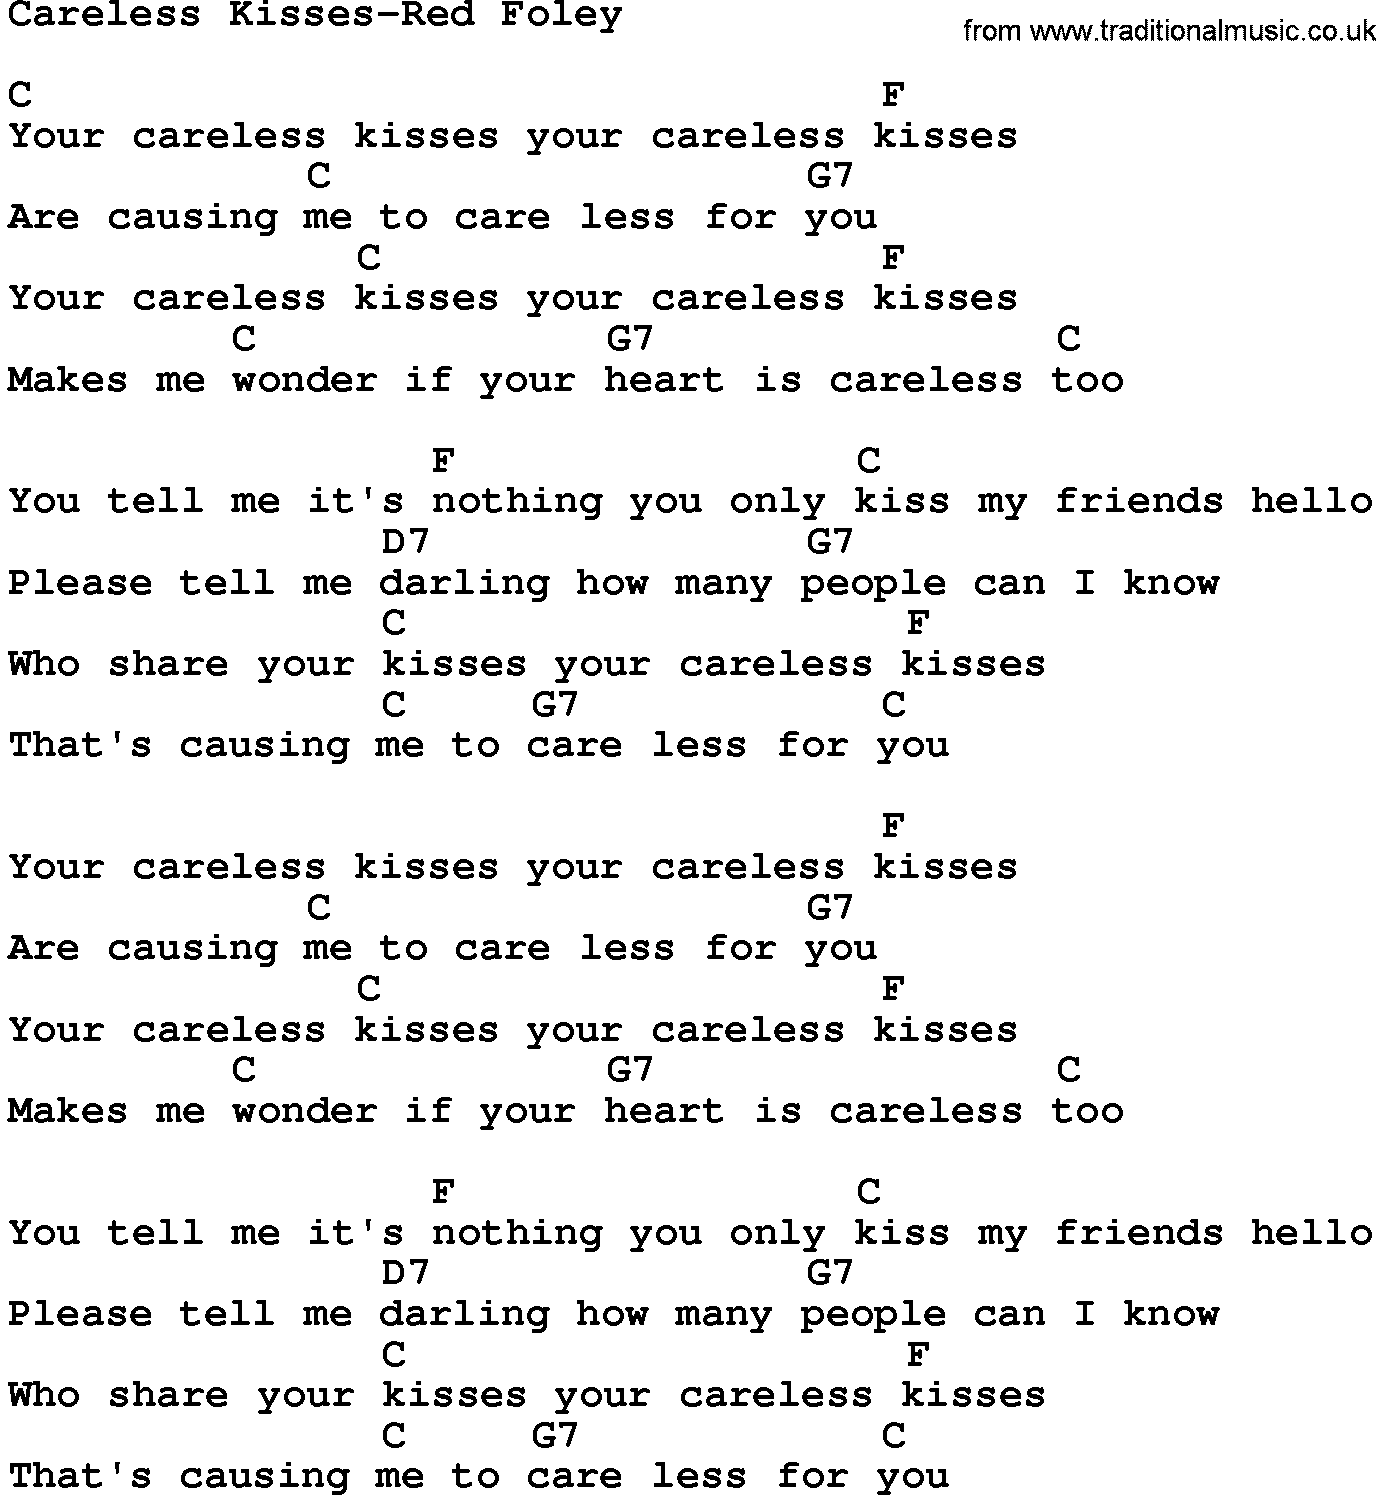 Country music song: Careless Kisses-Red Foley lyrics and chords